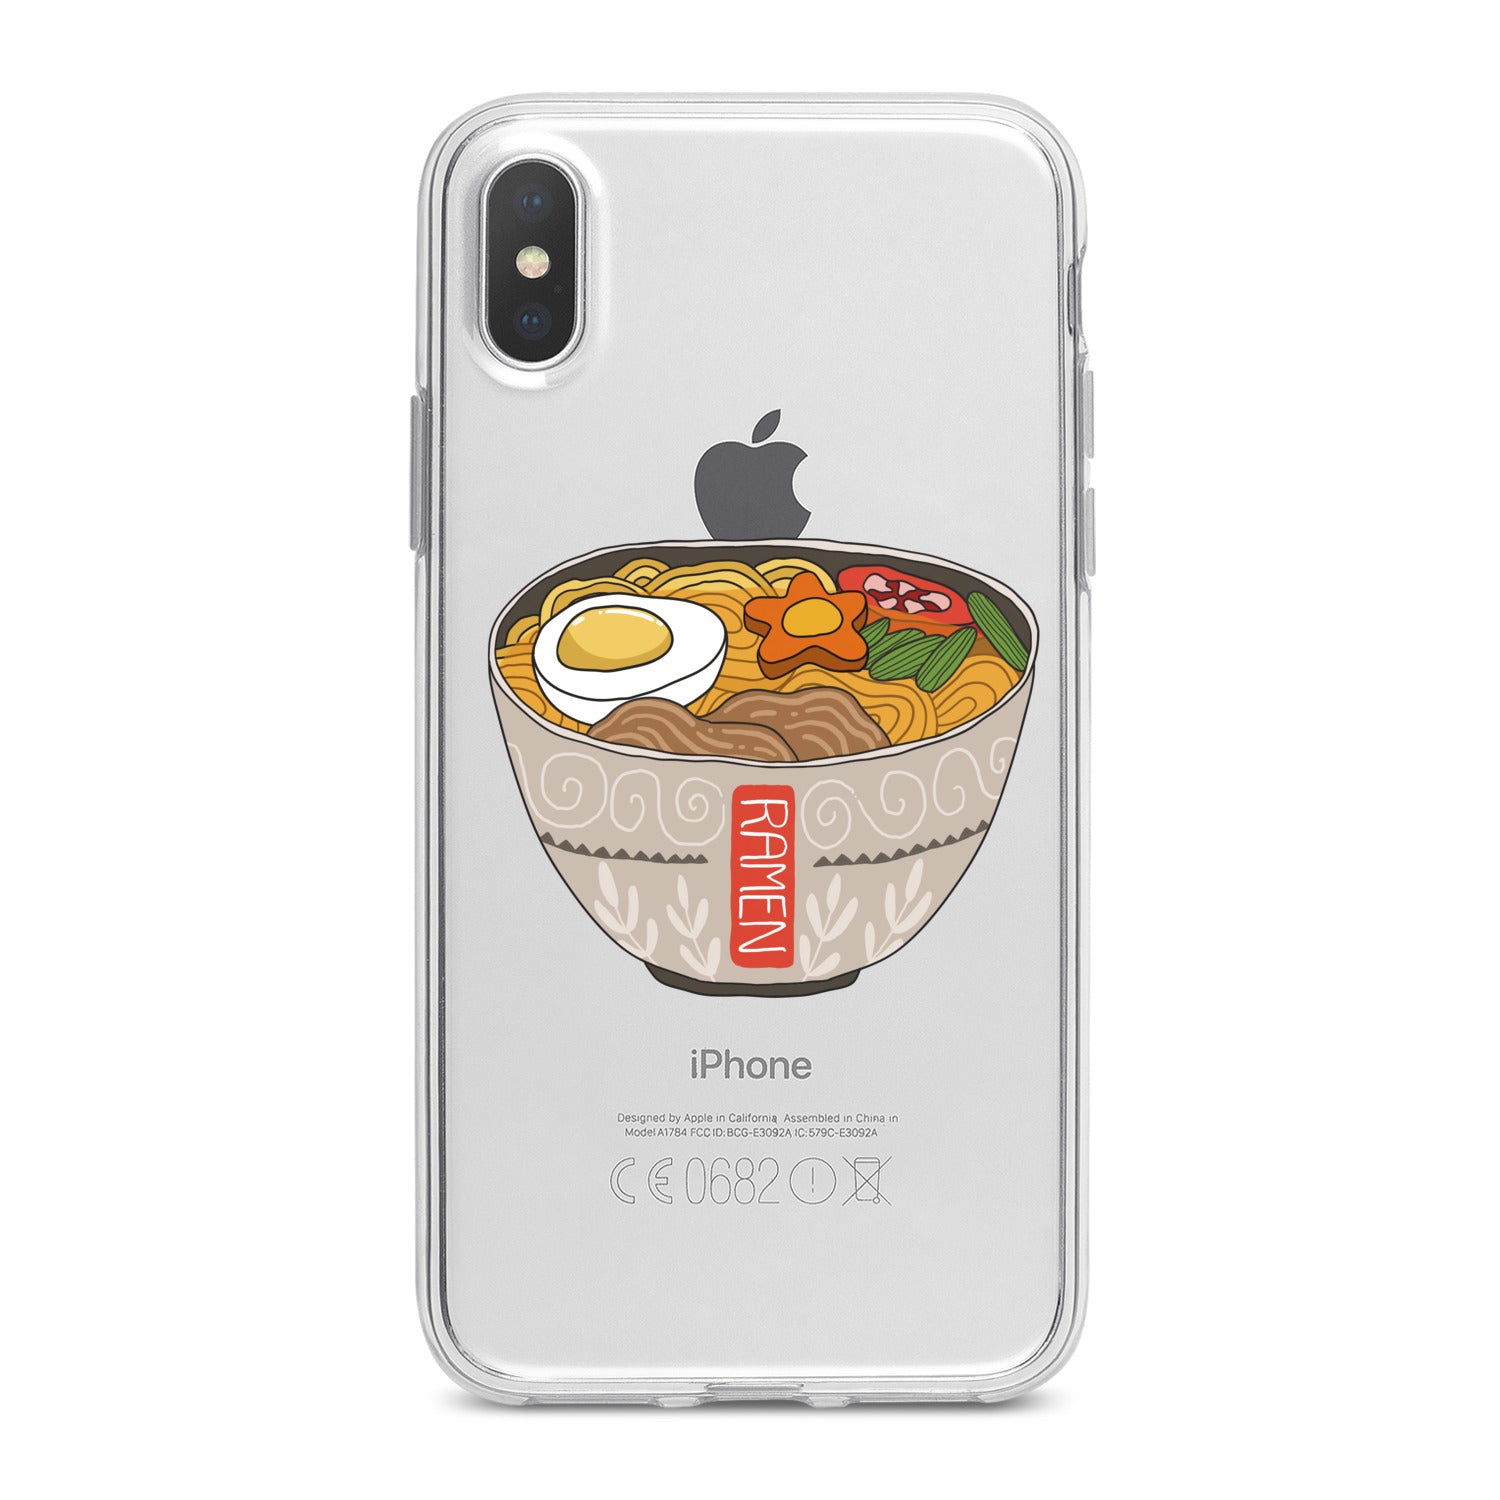 Lex Altern Ramen Dish Phone Case for your iPhone & Android phone.